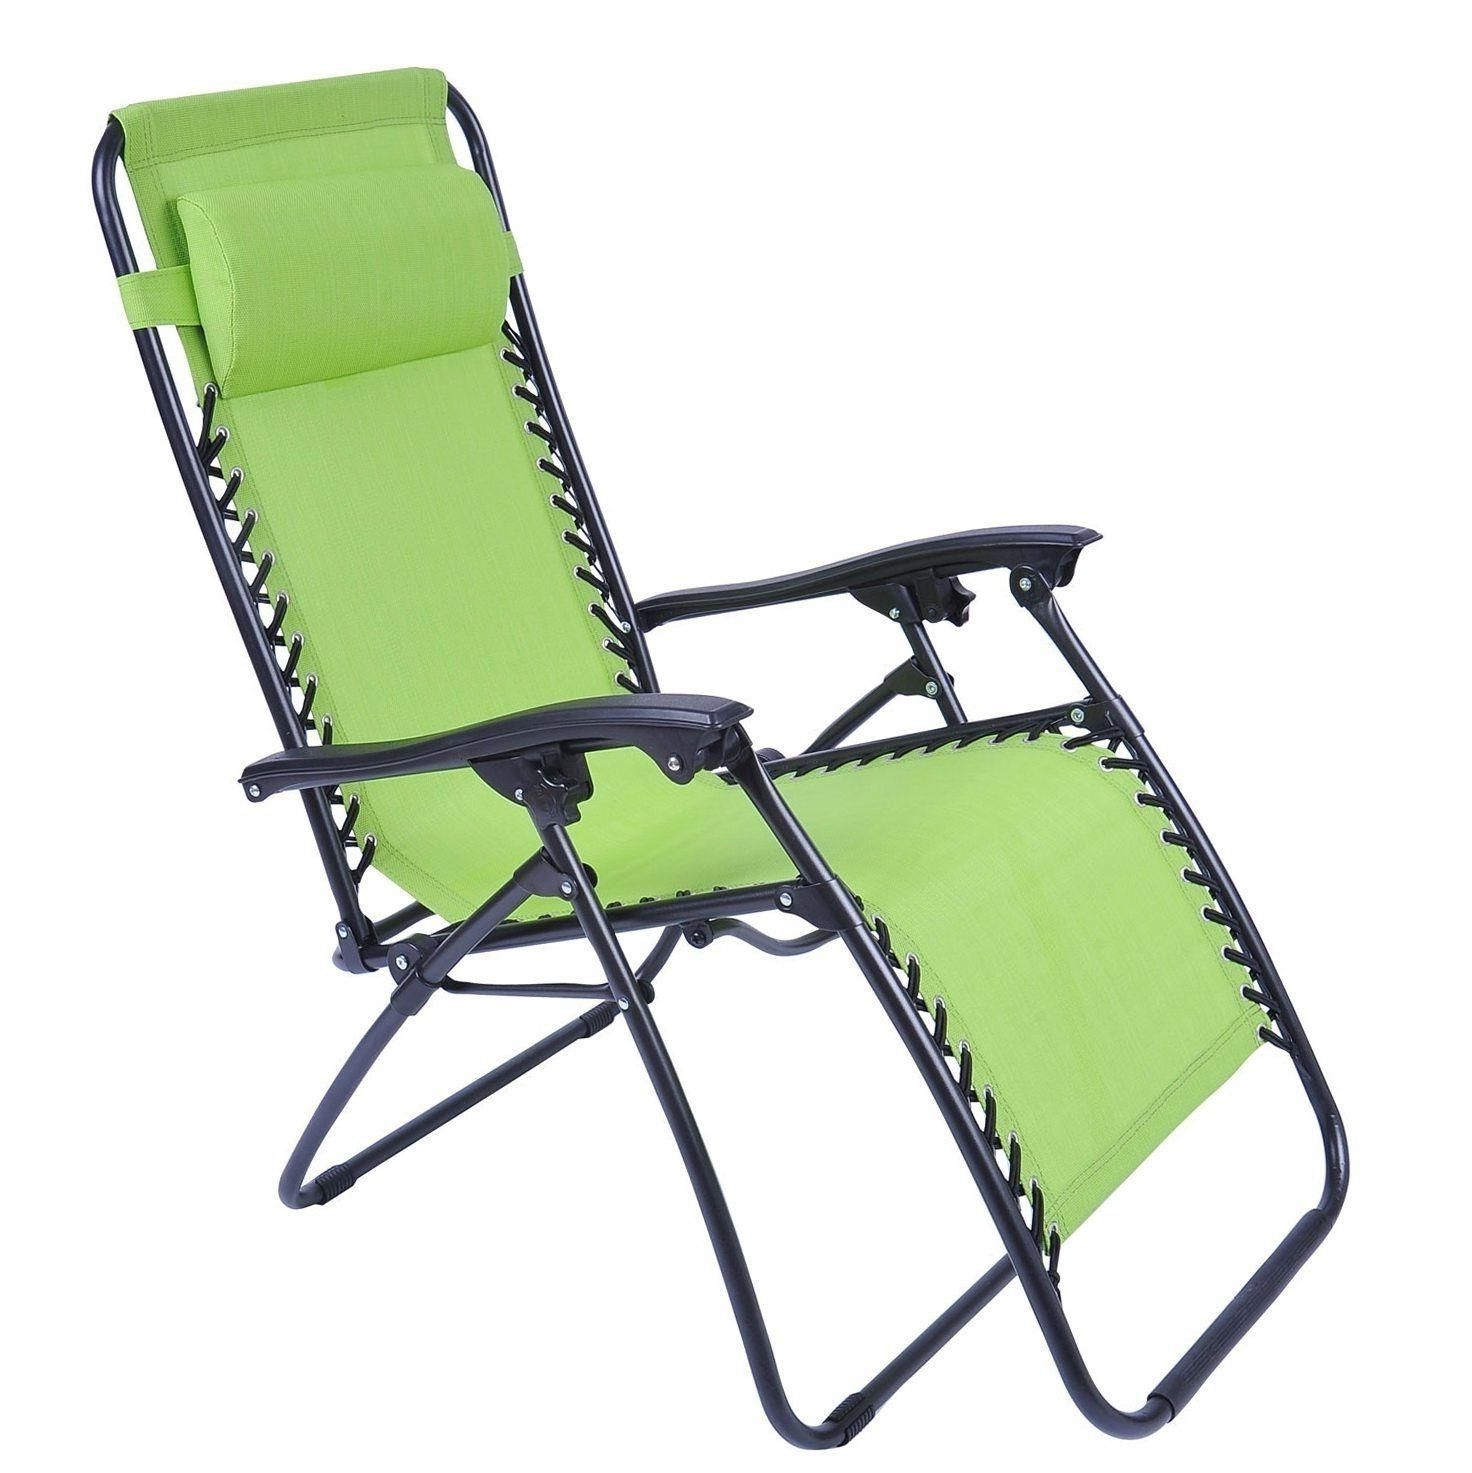 Folding Chaise Lounge Chairs For Outdoor With Best And Newest Furniture : Outdoor Loveseat Cushions Inspirational Lounge Chair (View 11 of 15)